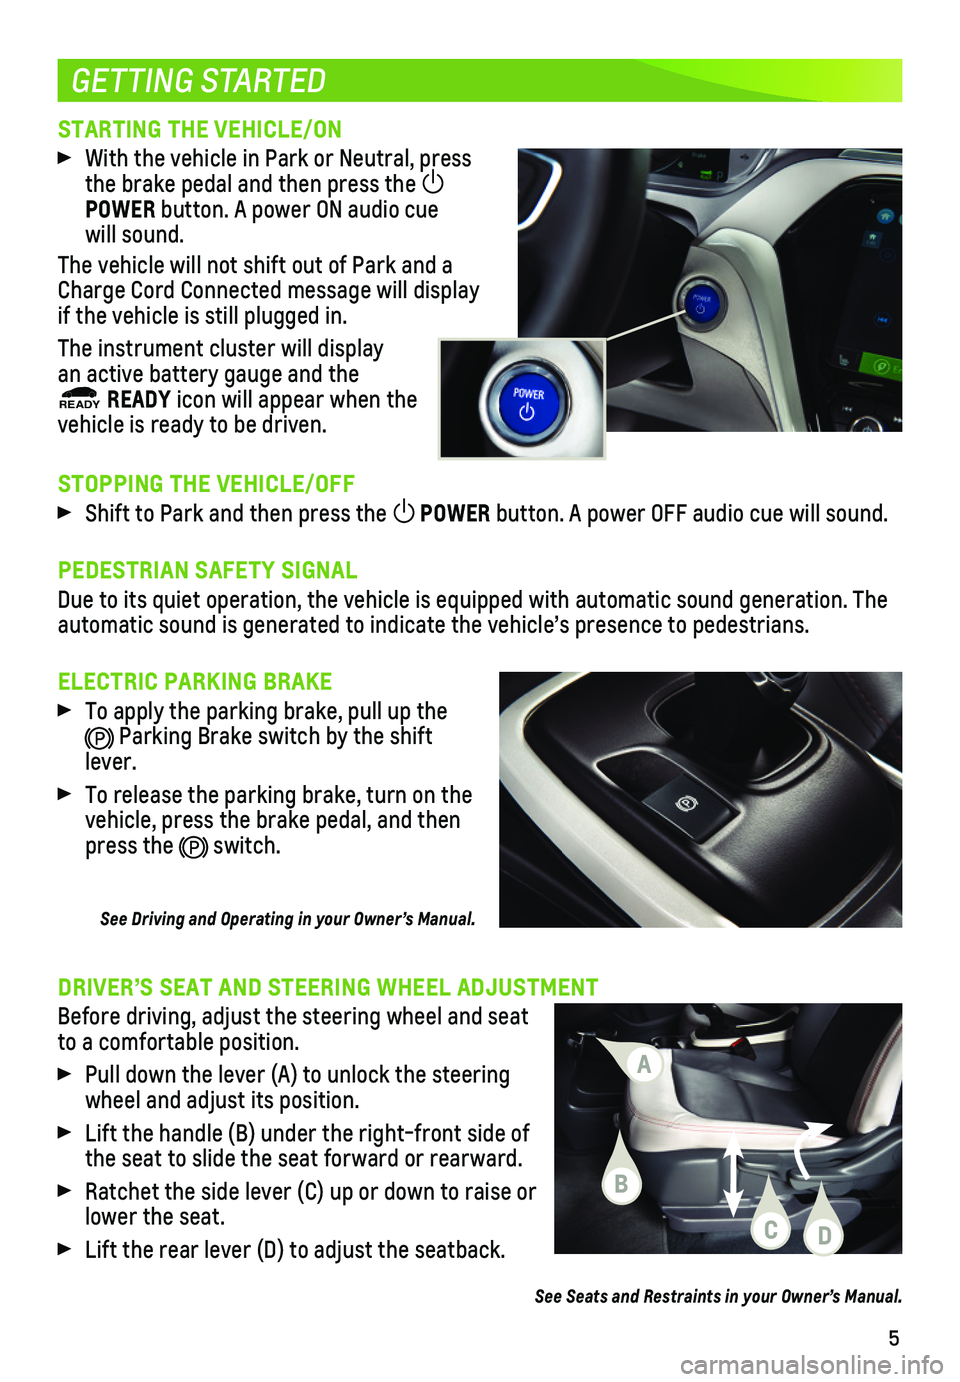 CHEVROLET BOLT EV 2021  Get To Know Guide 5
STARTING THE VEHICLE/ON
 With the vehicle in Park or Neutral, press the brake pedal and then press the POWER button. A power ON audio cue will sound.
The vehicle will not shift out of Park and a Ch